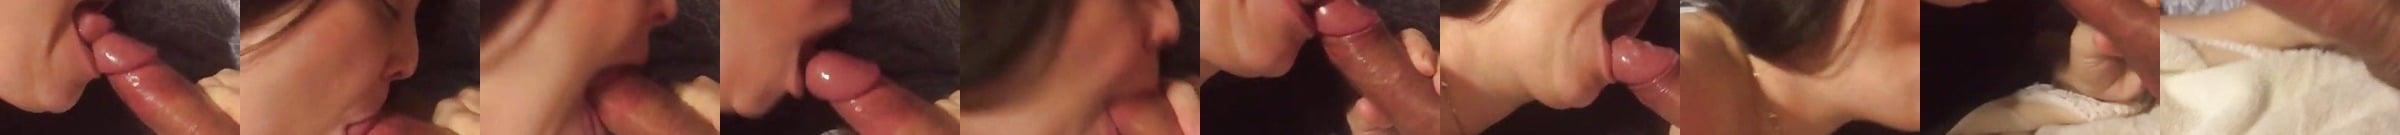 She Wants To Taste Cum So Bad Free Very Bad Porn Video 4f XHamster